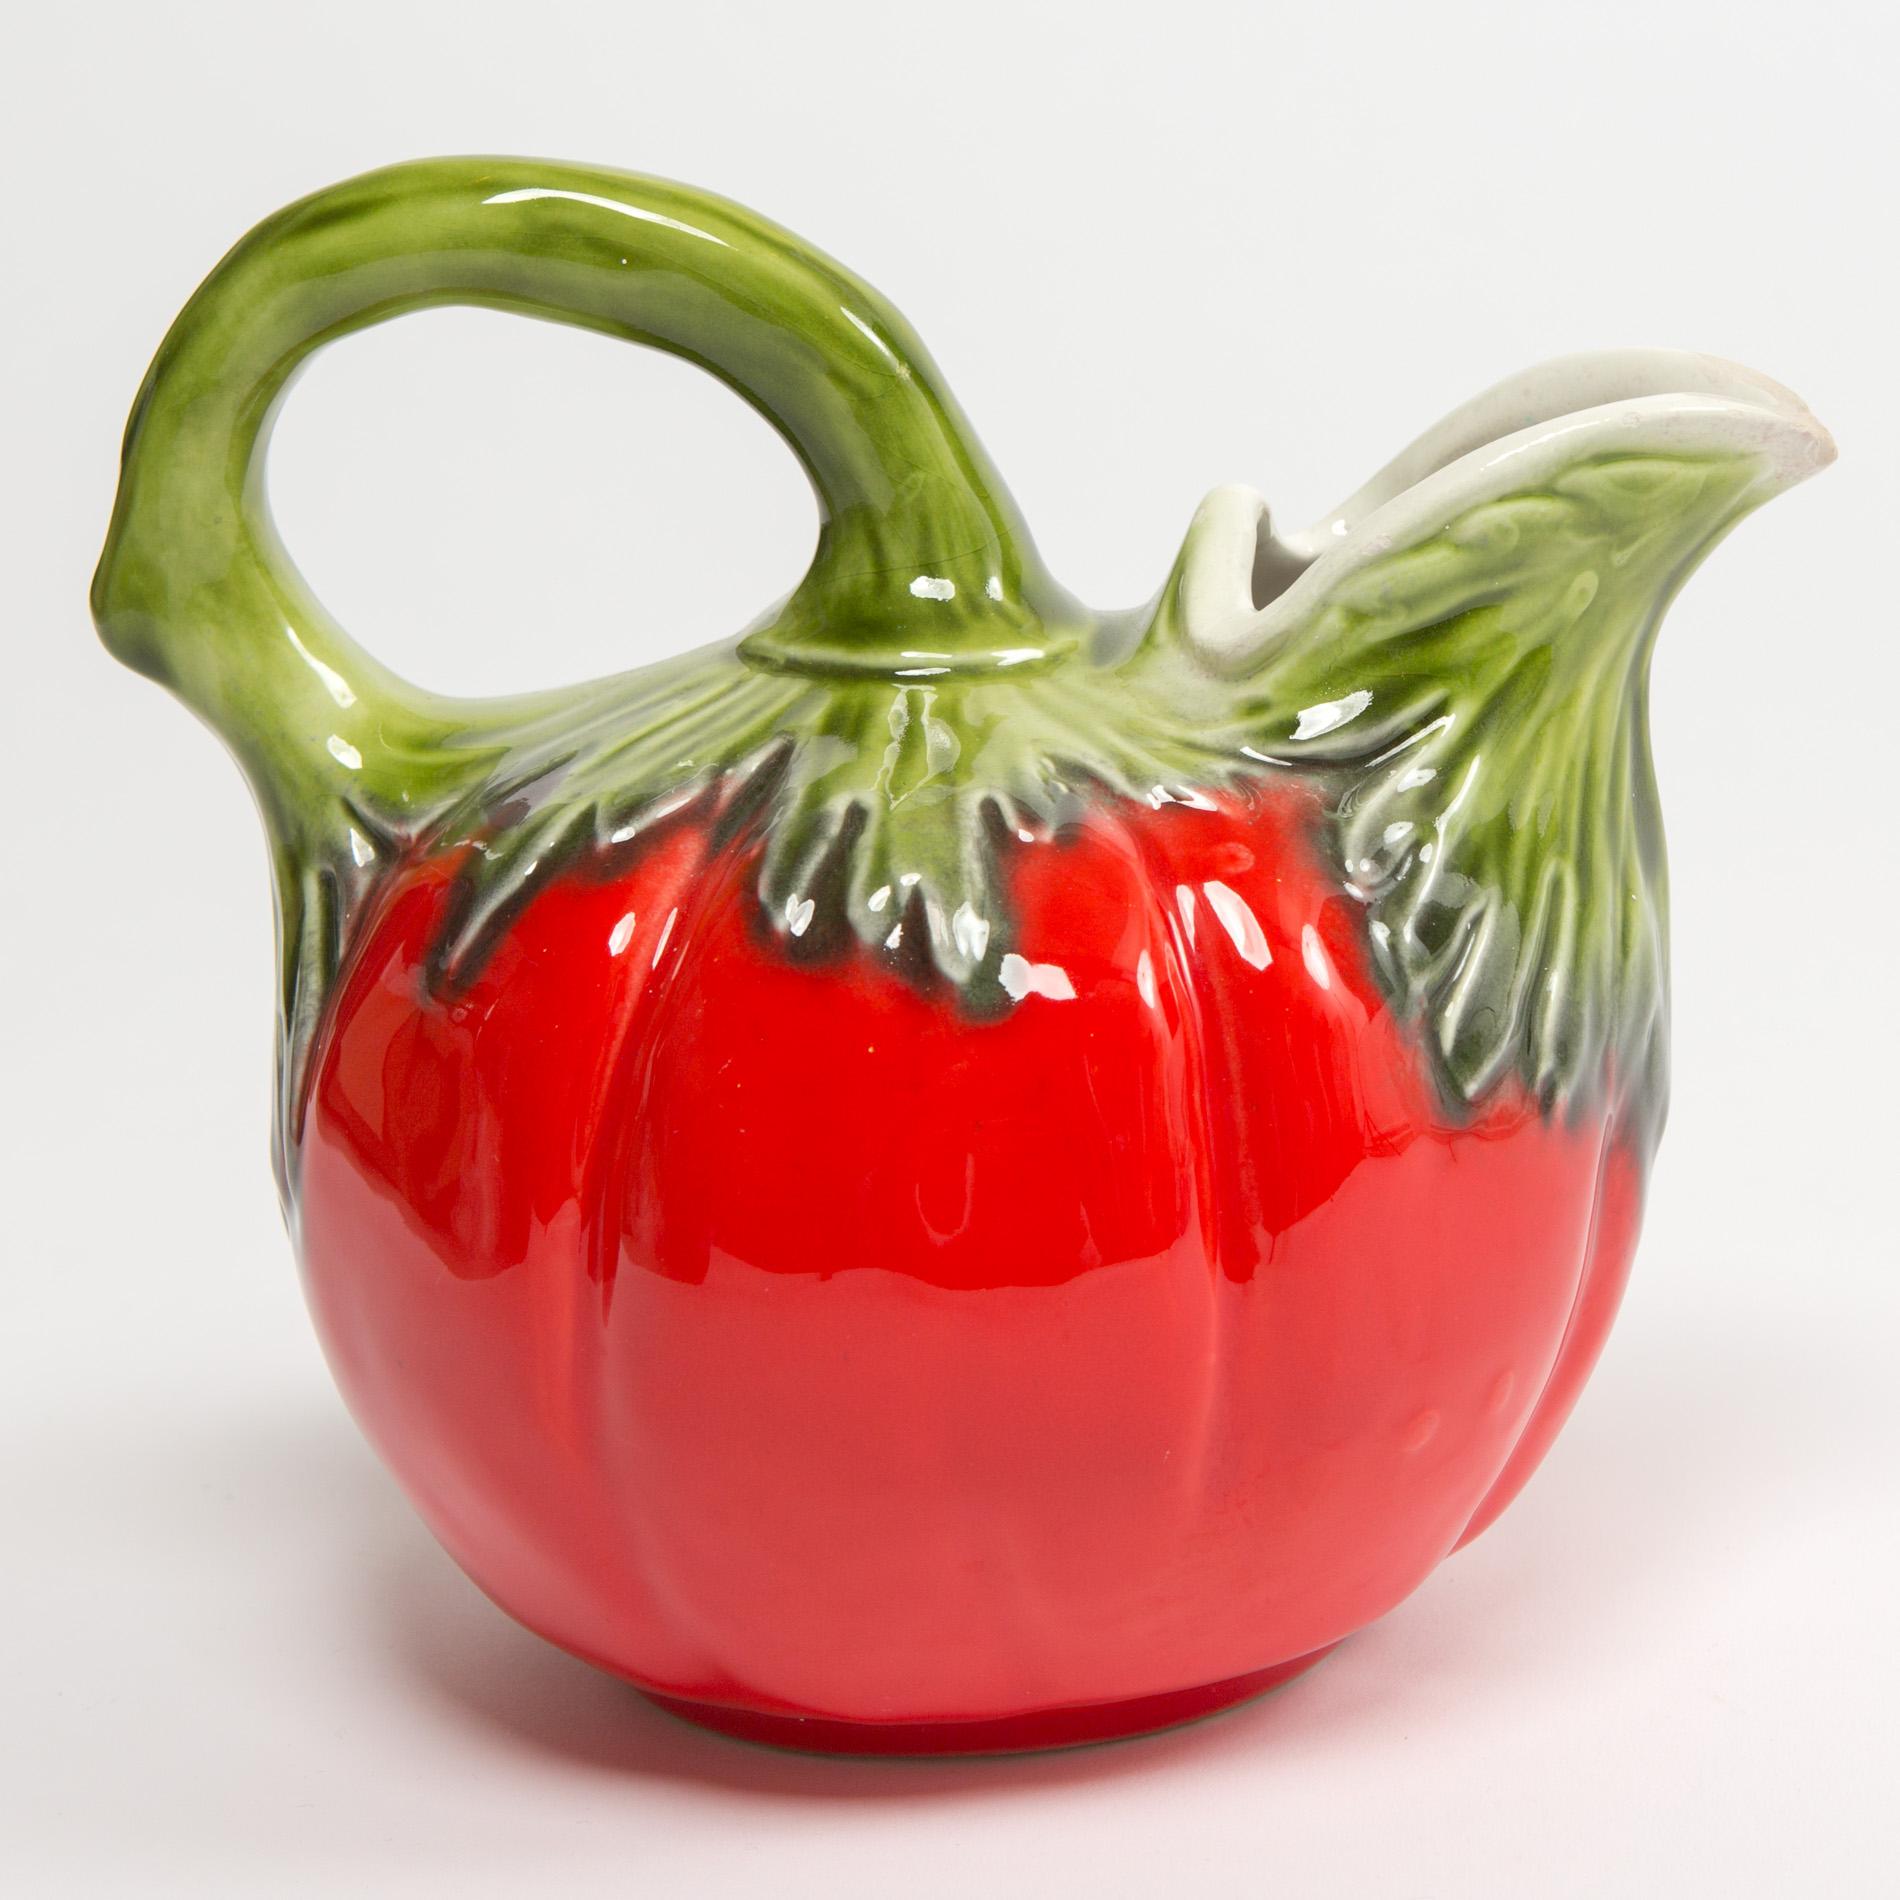 Tomato red pitcher/jug. Perfect for water, milk or juice.